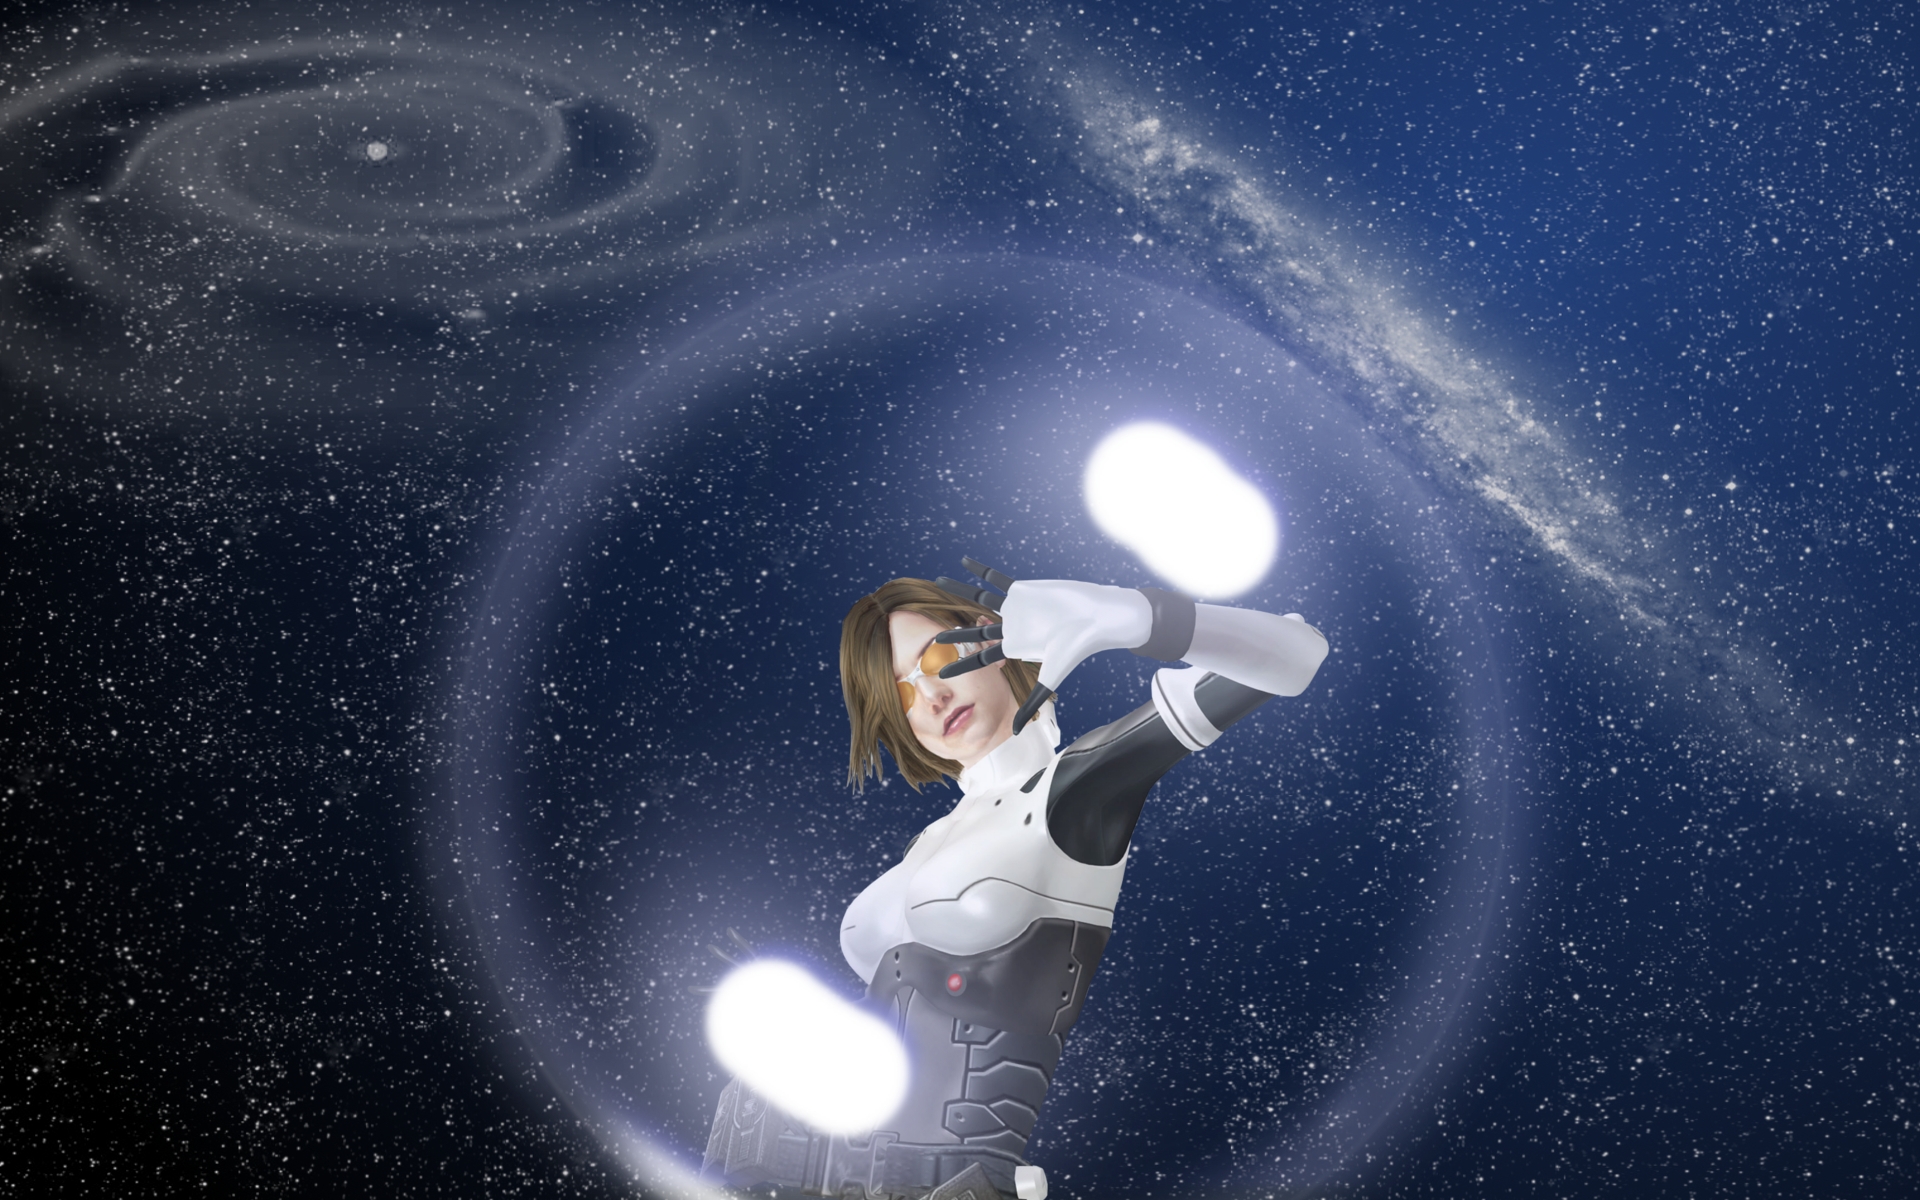 In Bubble, In Space by NicoFr38 on DeviantArt